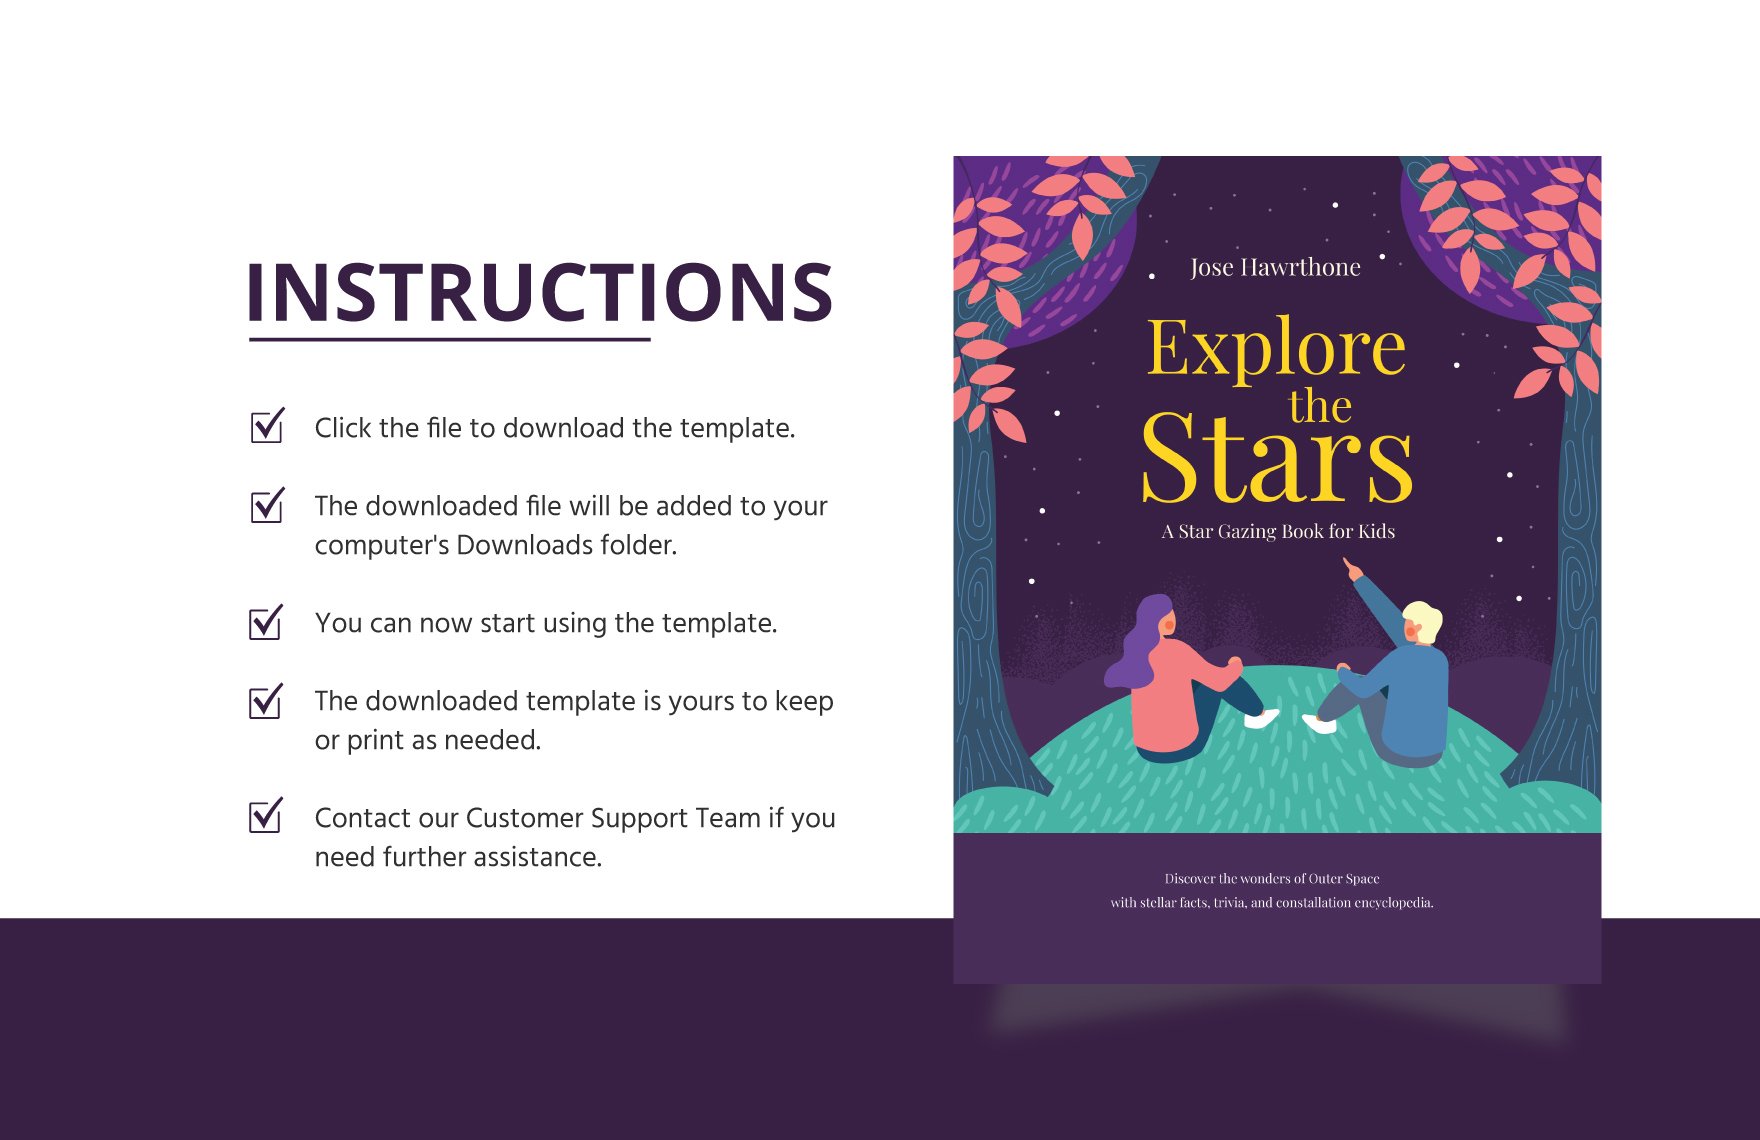 Children's Education Book Cover Template